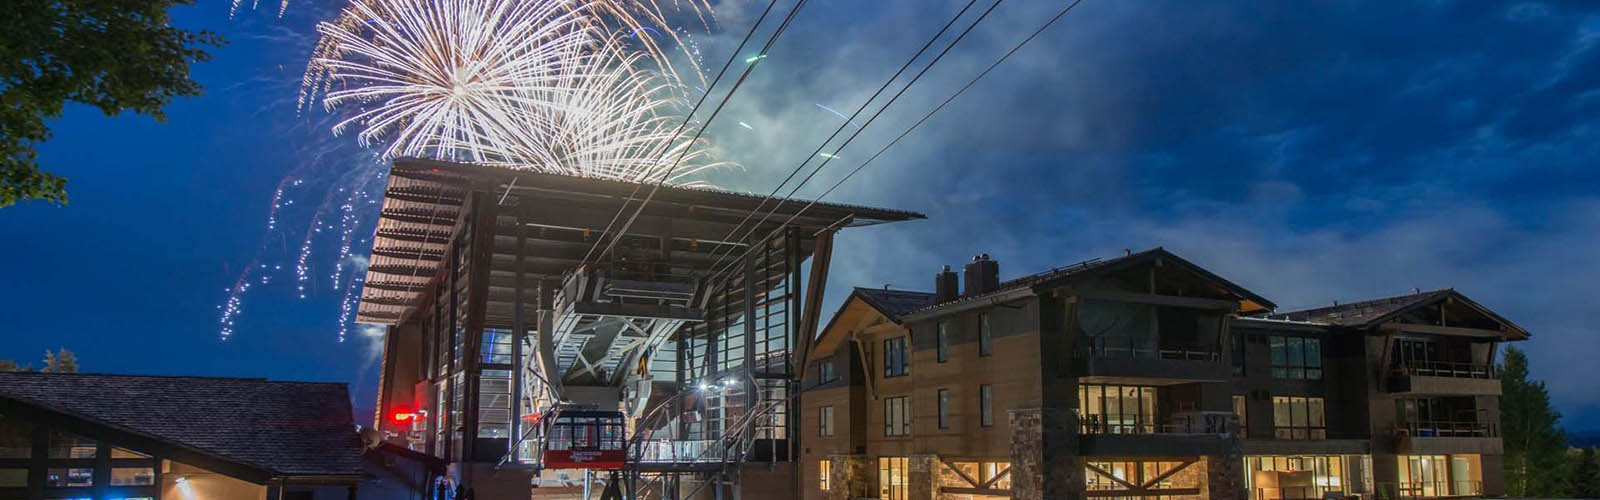 Fireworks explode in the night sky behind the Jackson Hole Aerial Tram in Teton Village, WY.